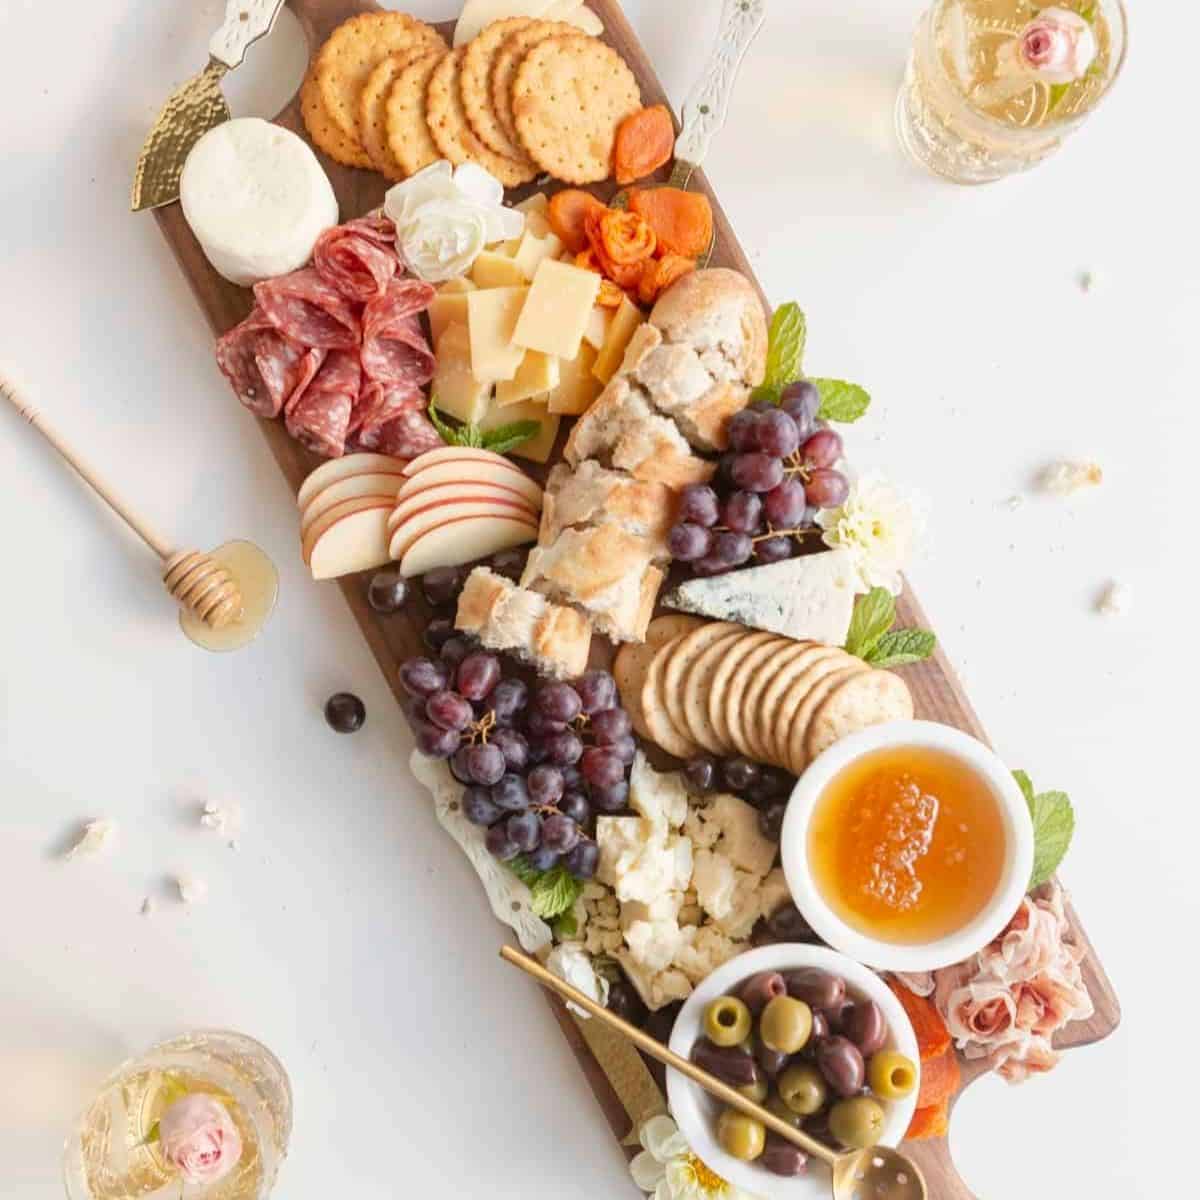 https://amandawilens.com/wp-content/uploads/2021/07/featured-image-easy-charcuterie-board.jpg